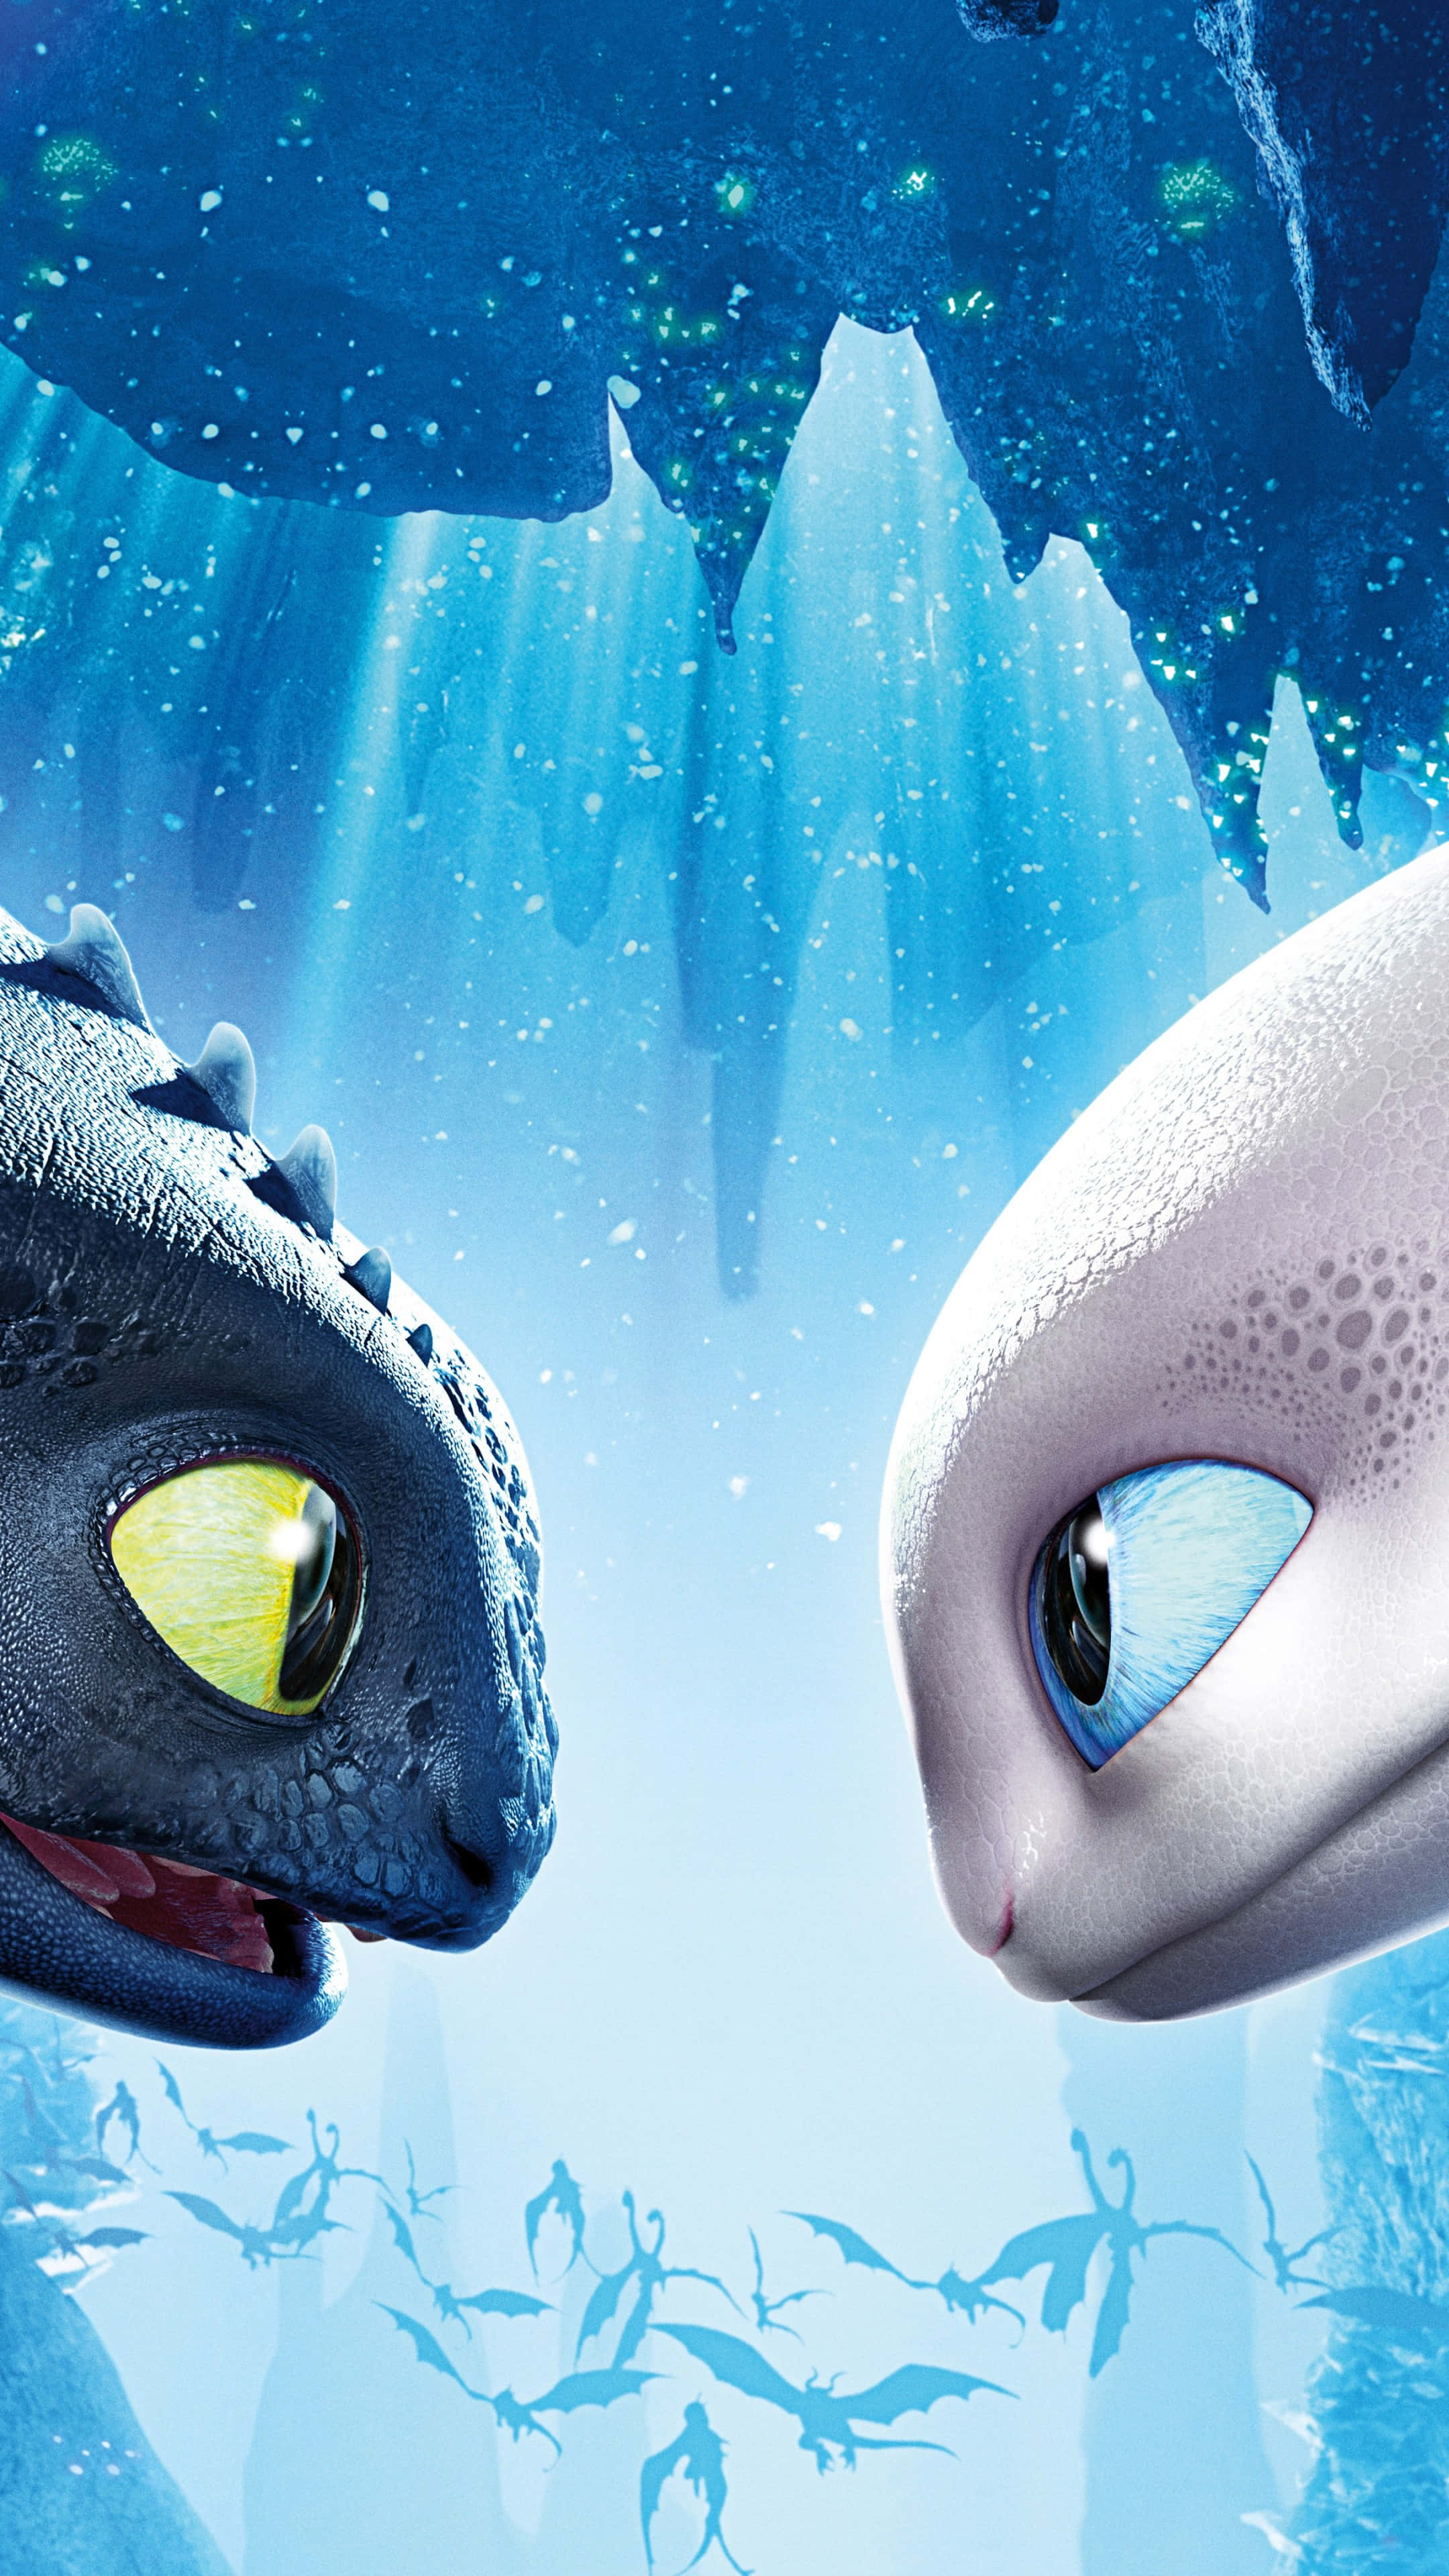 how to train your dragon 2 Wallpaper